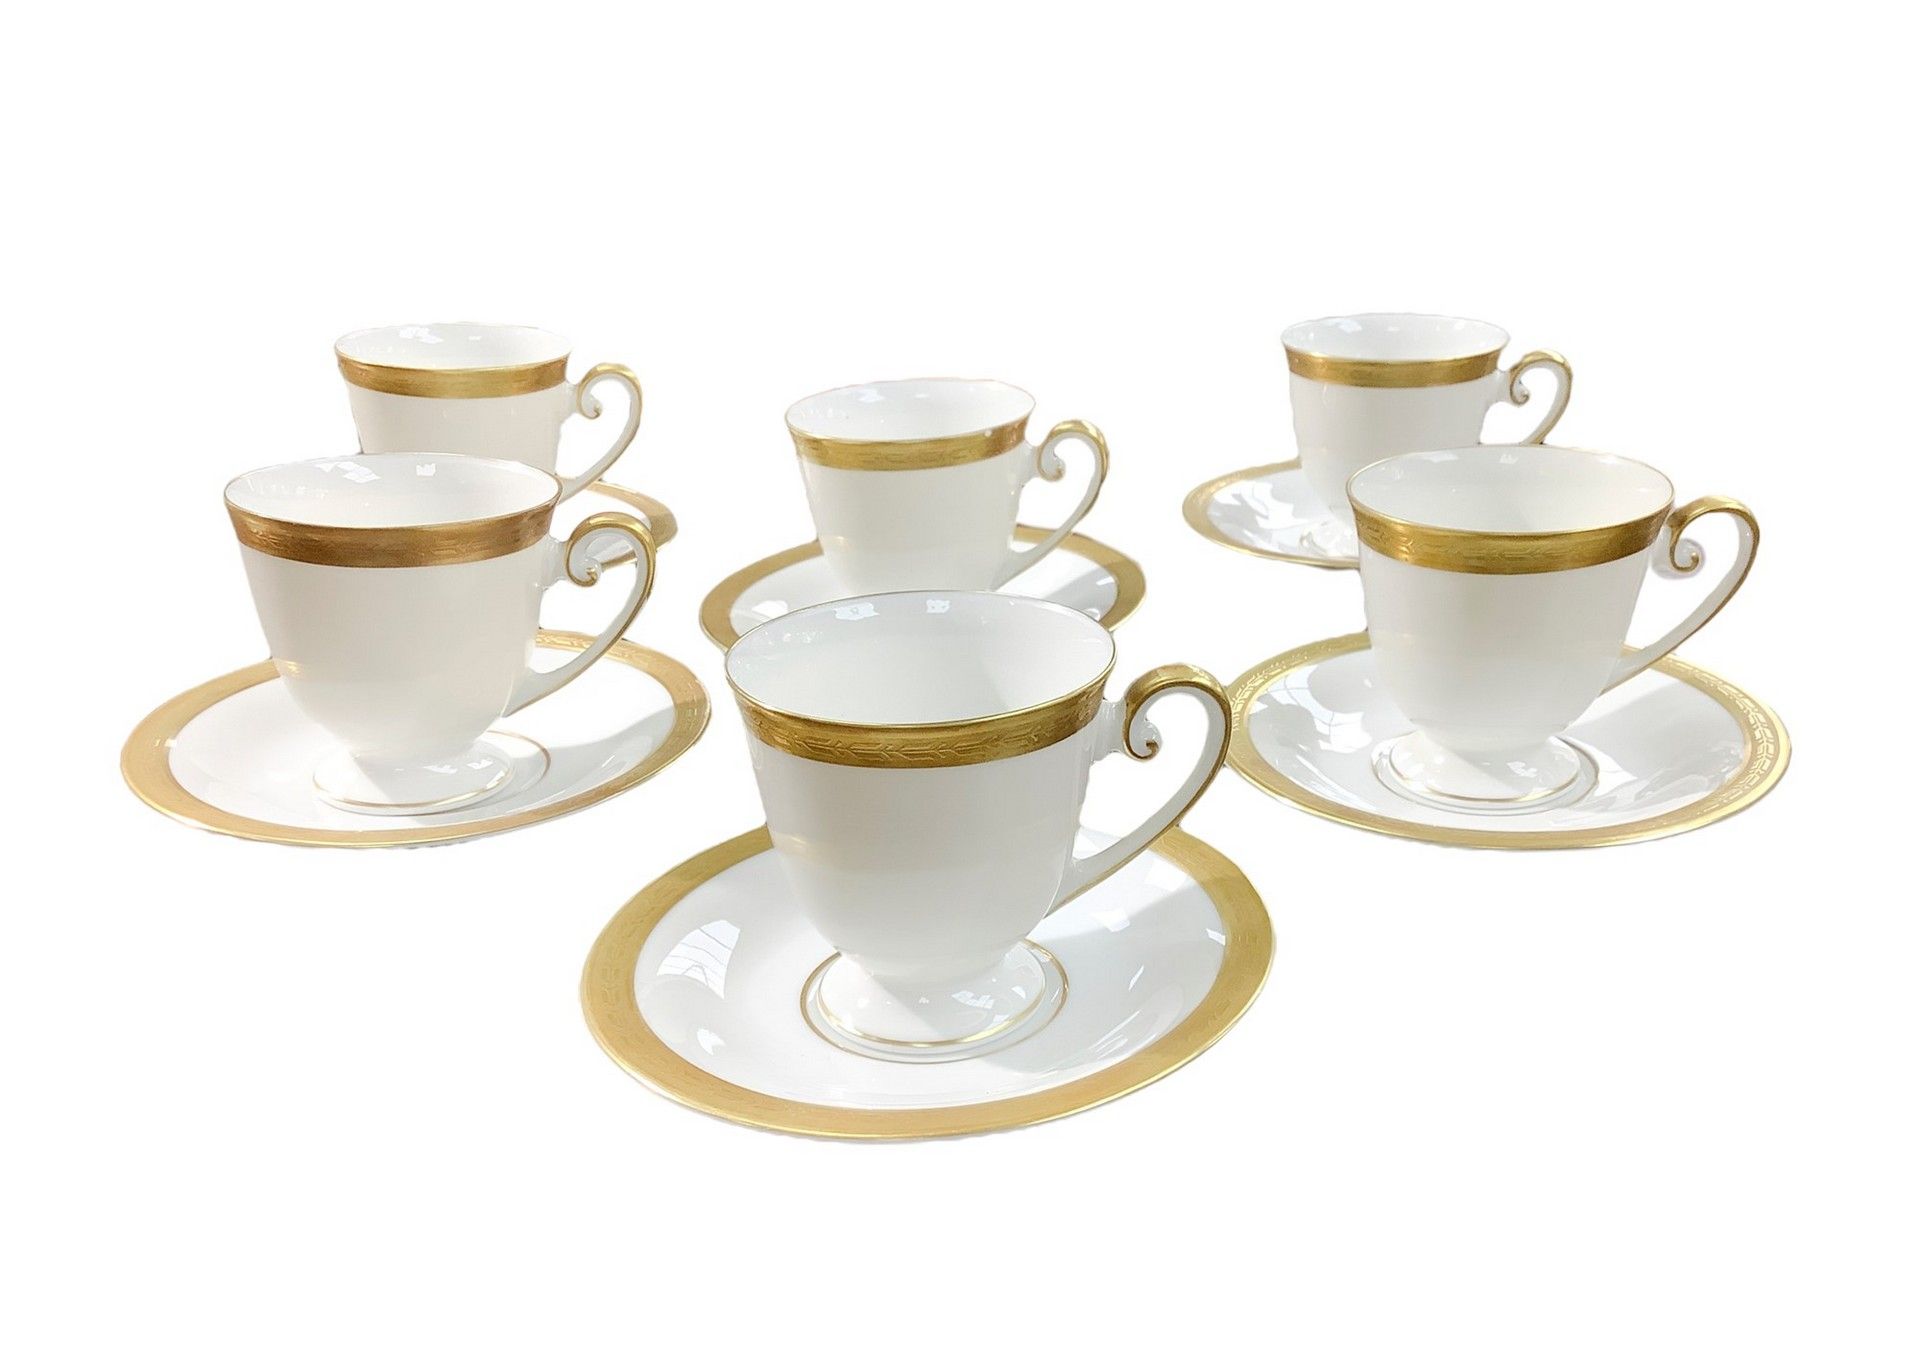 Null "Trschenreuth Germany" coffee cup service Porcelain Porcelain with gold edg&hellip;